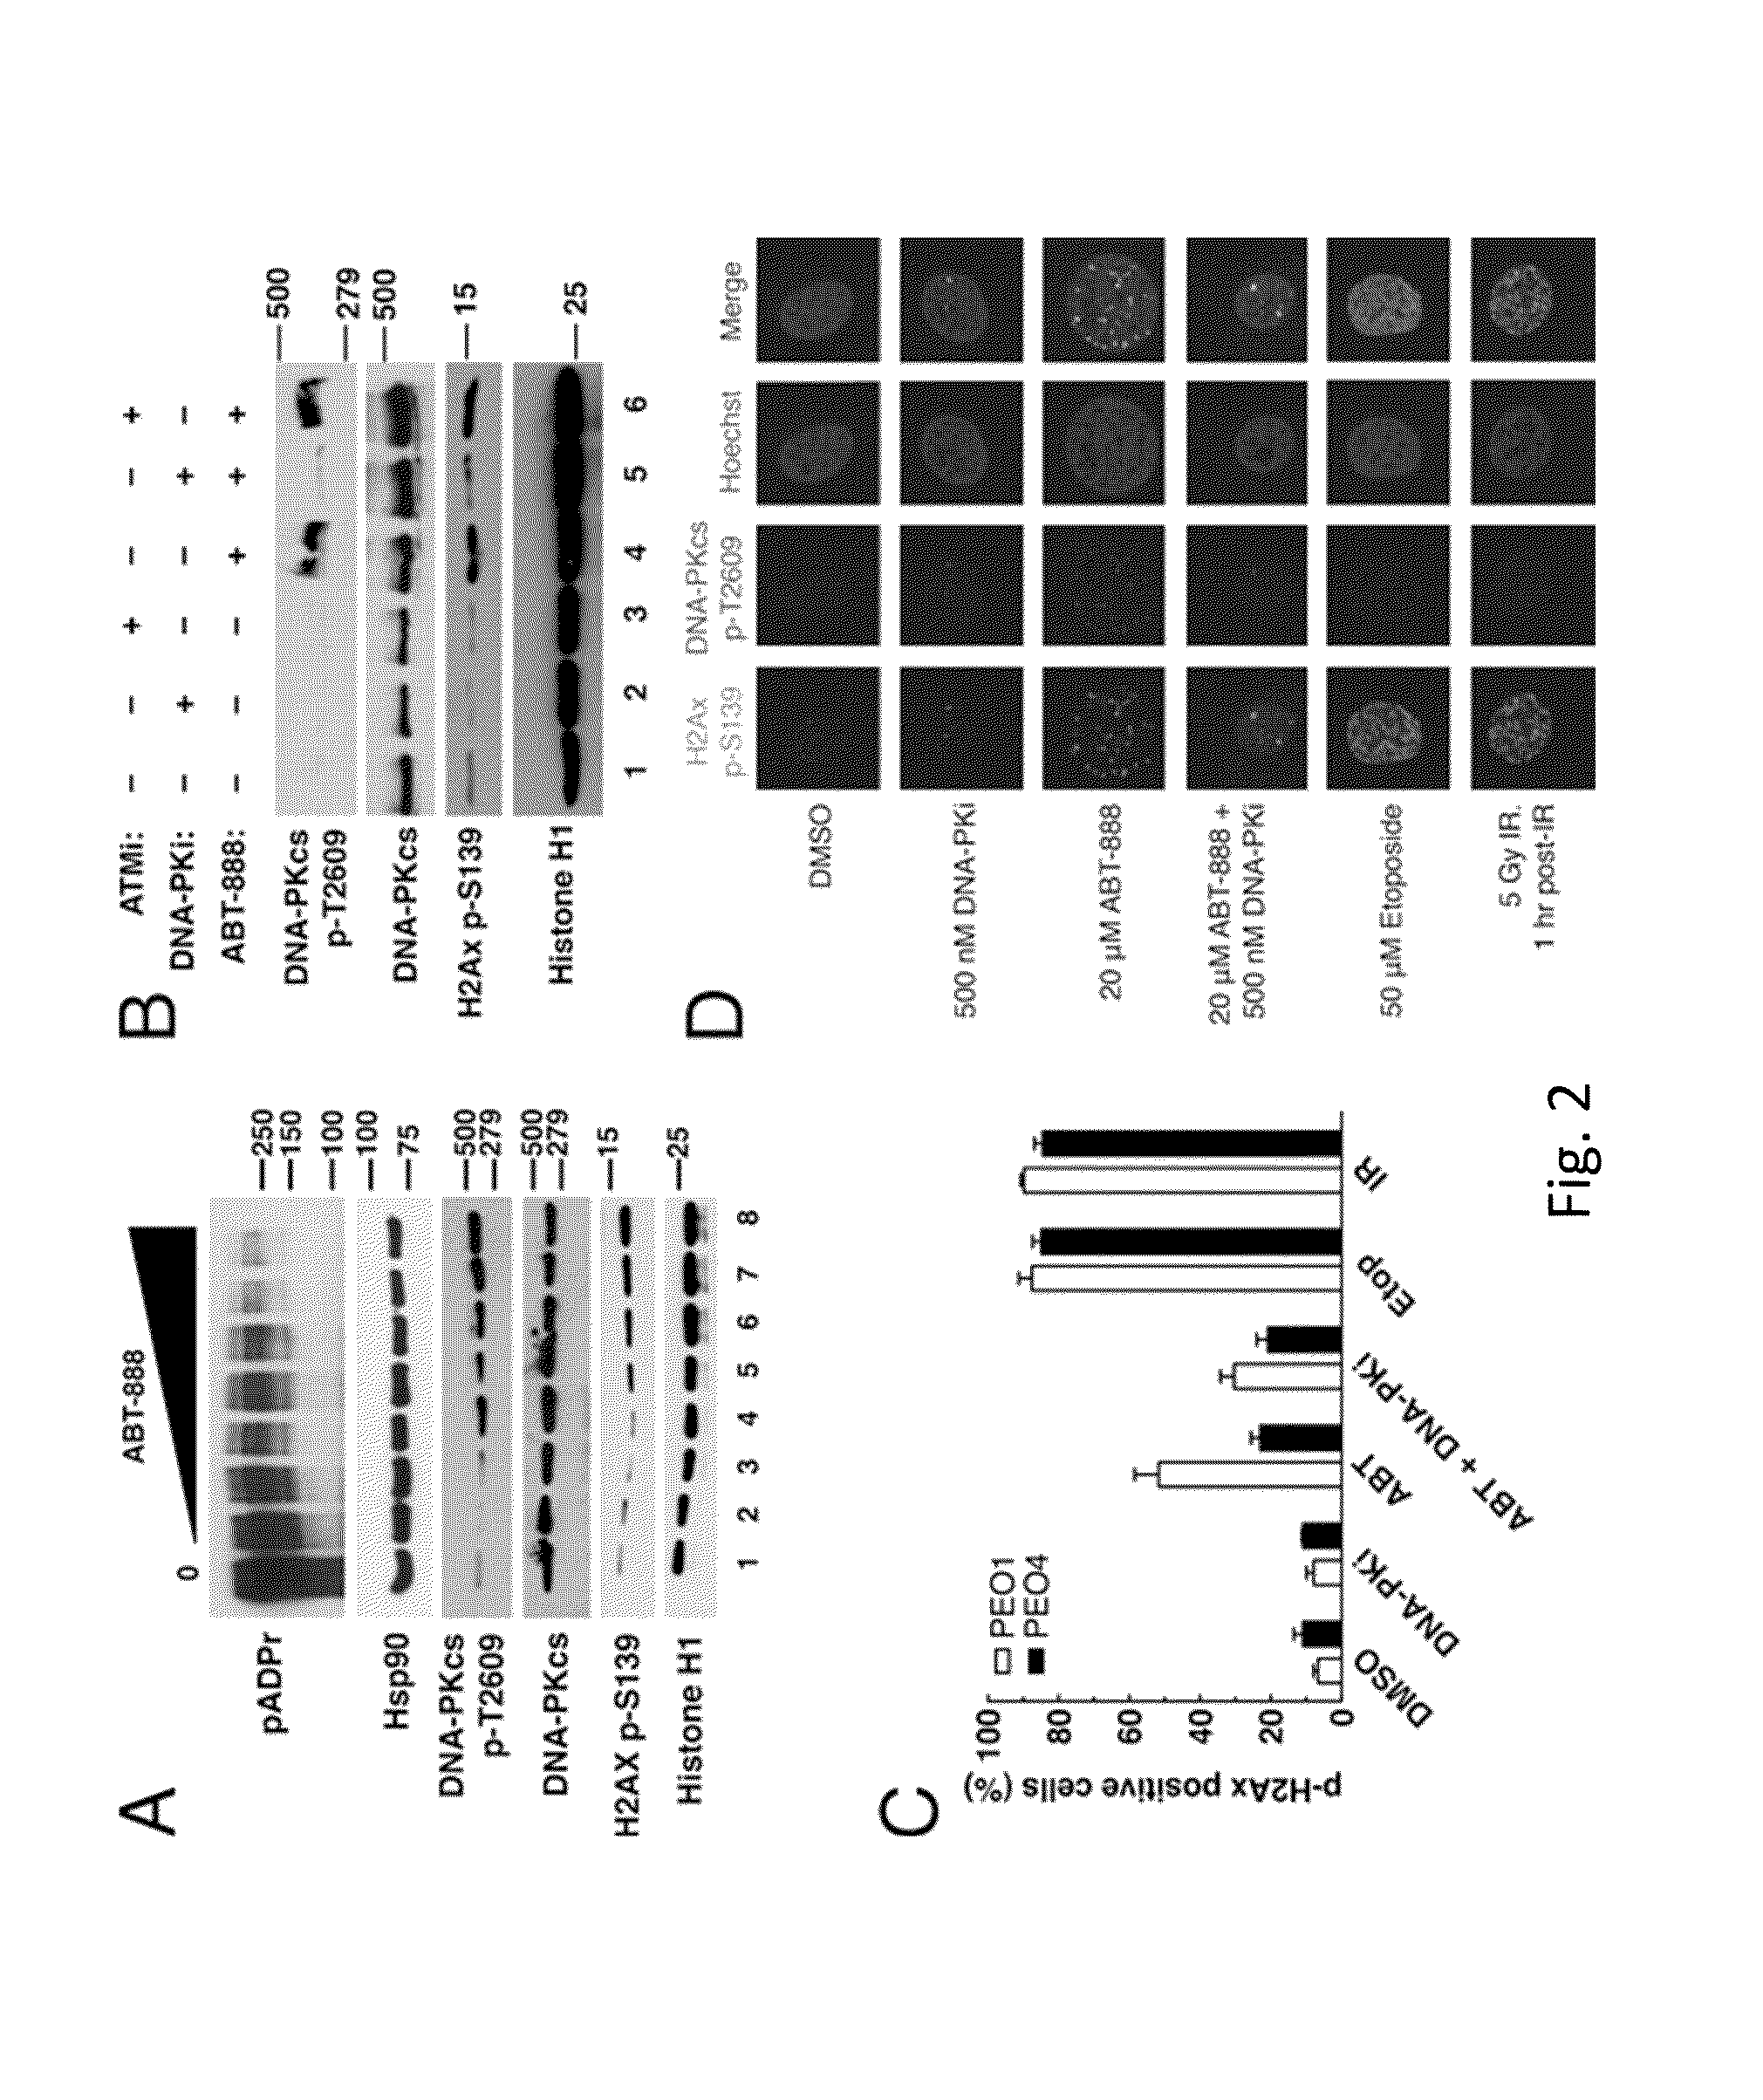 Methods and materials for assessing responsiveness to PARP inhibitors and platinating agents